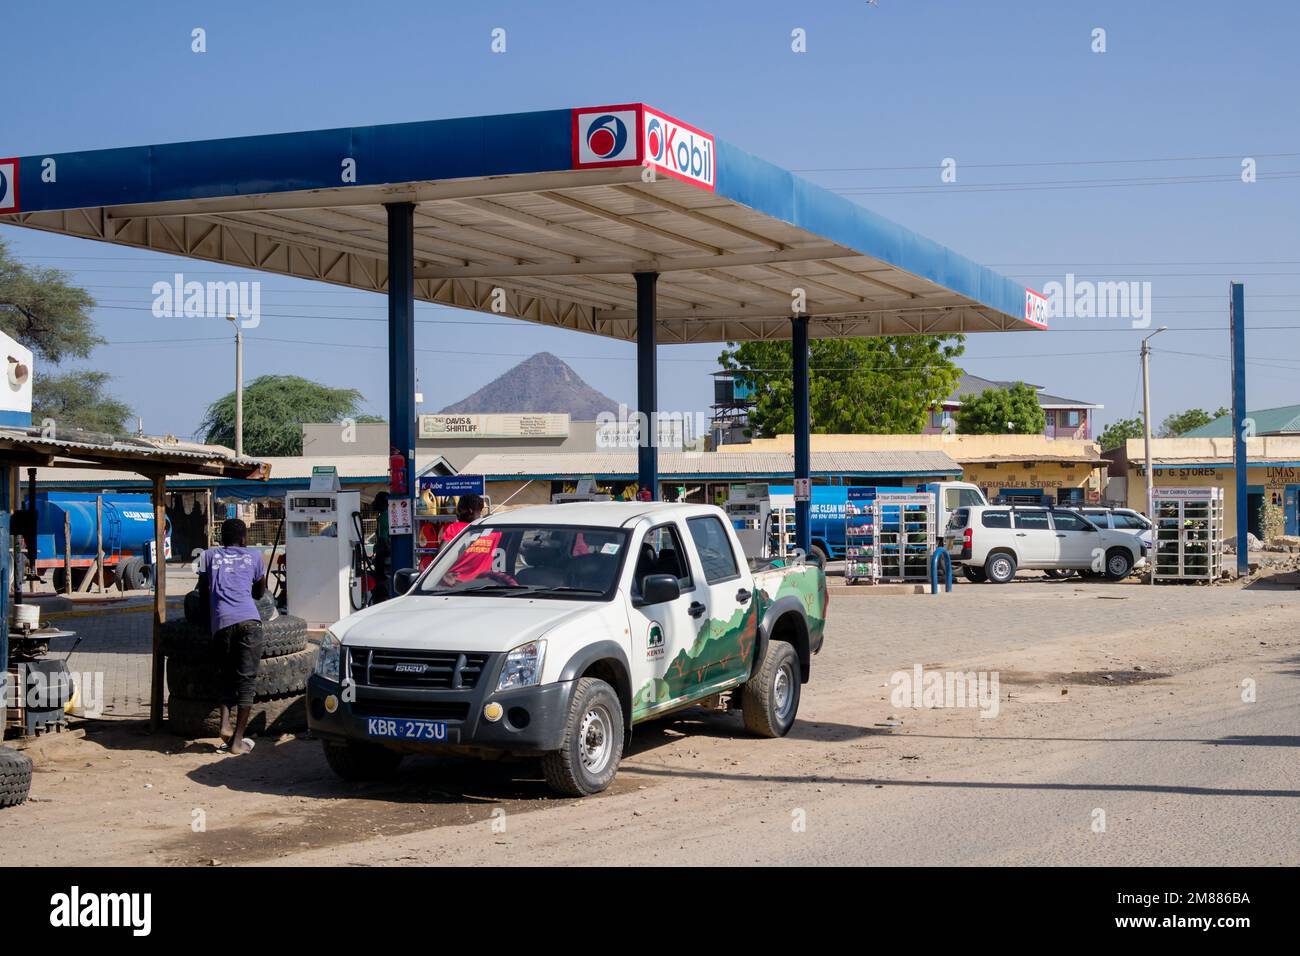 Roadside petrol station in rural Africa run by Kobil, now Rubis Energy Stock Photo